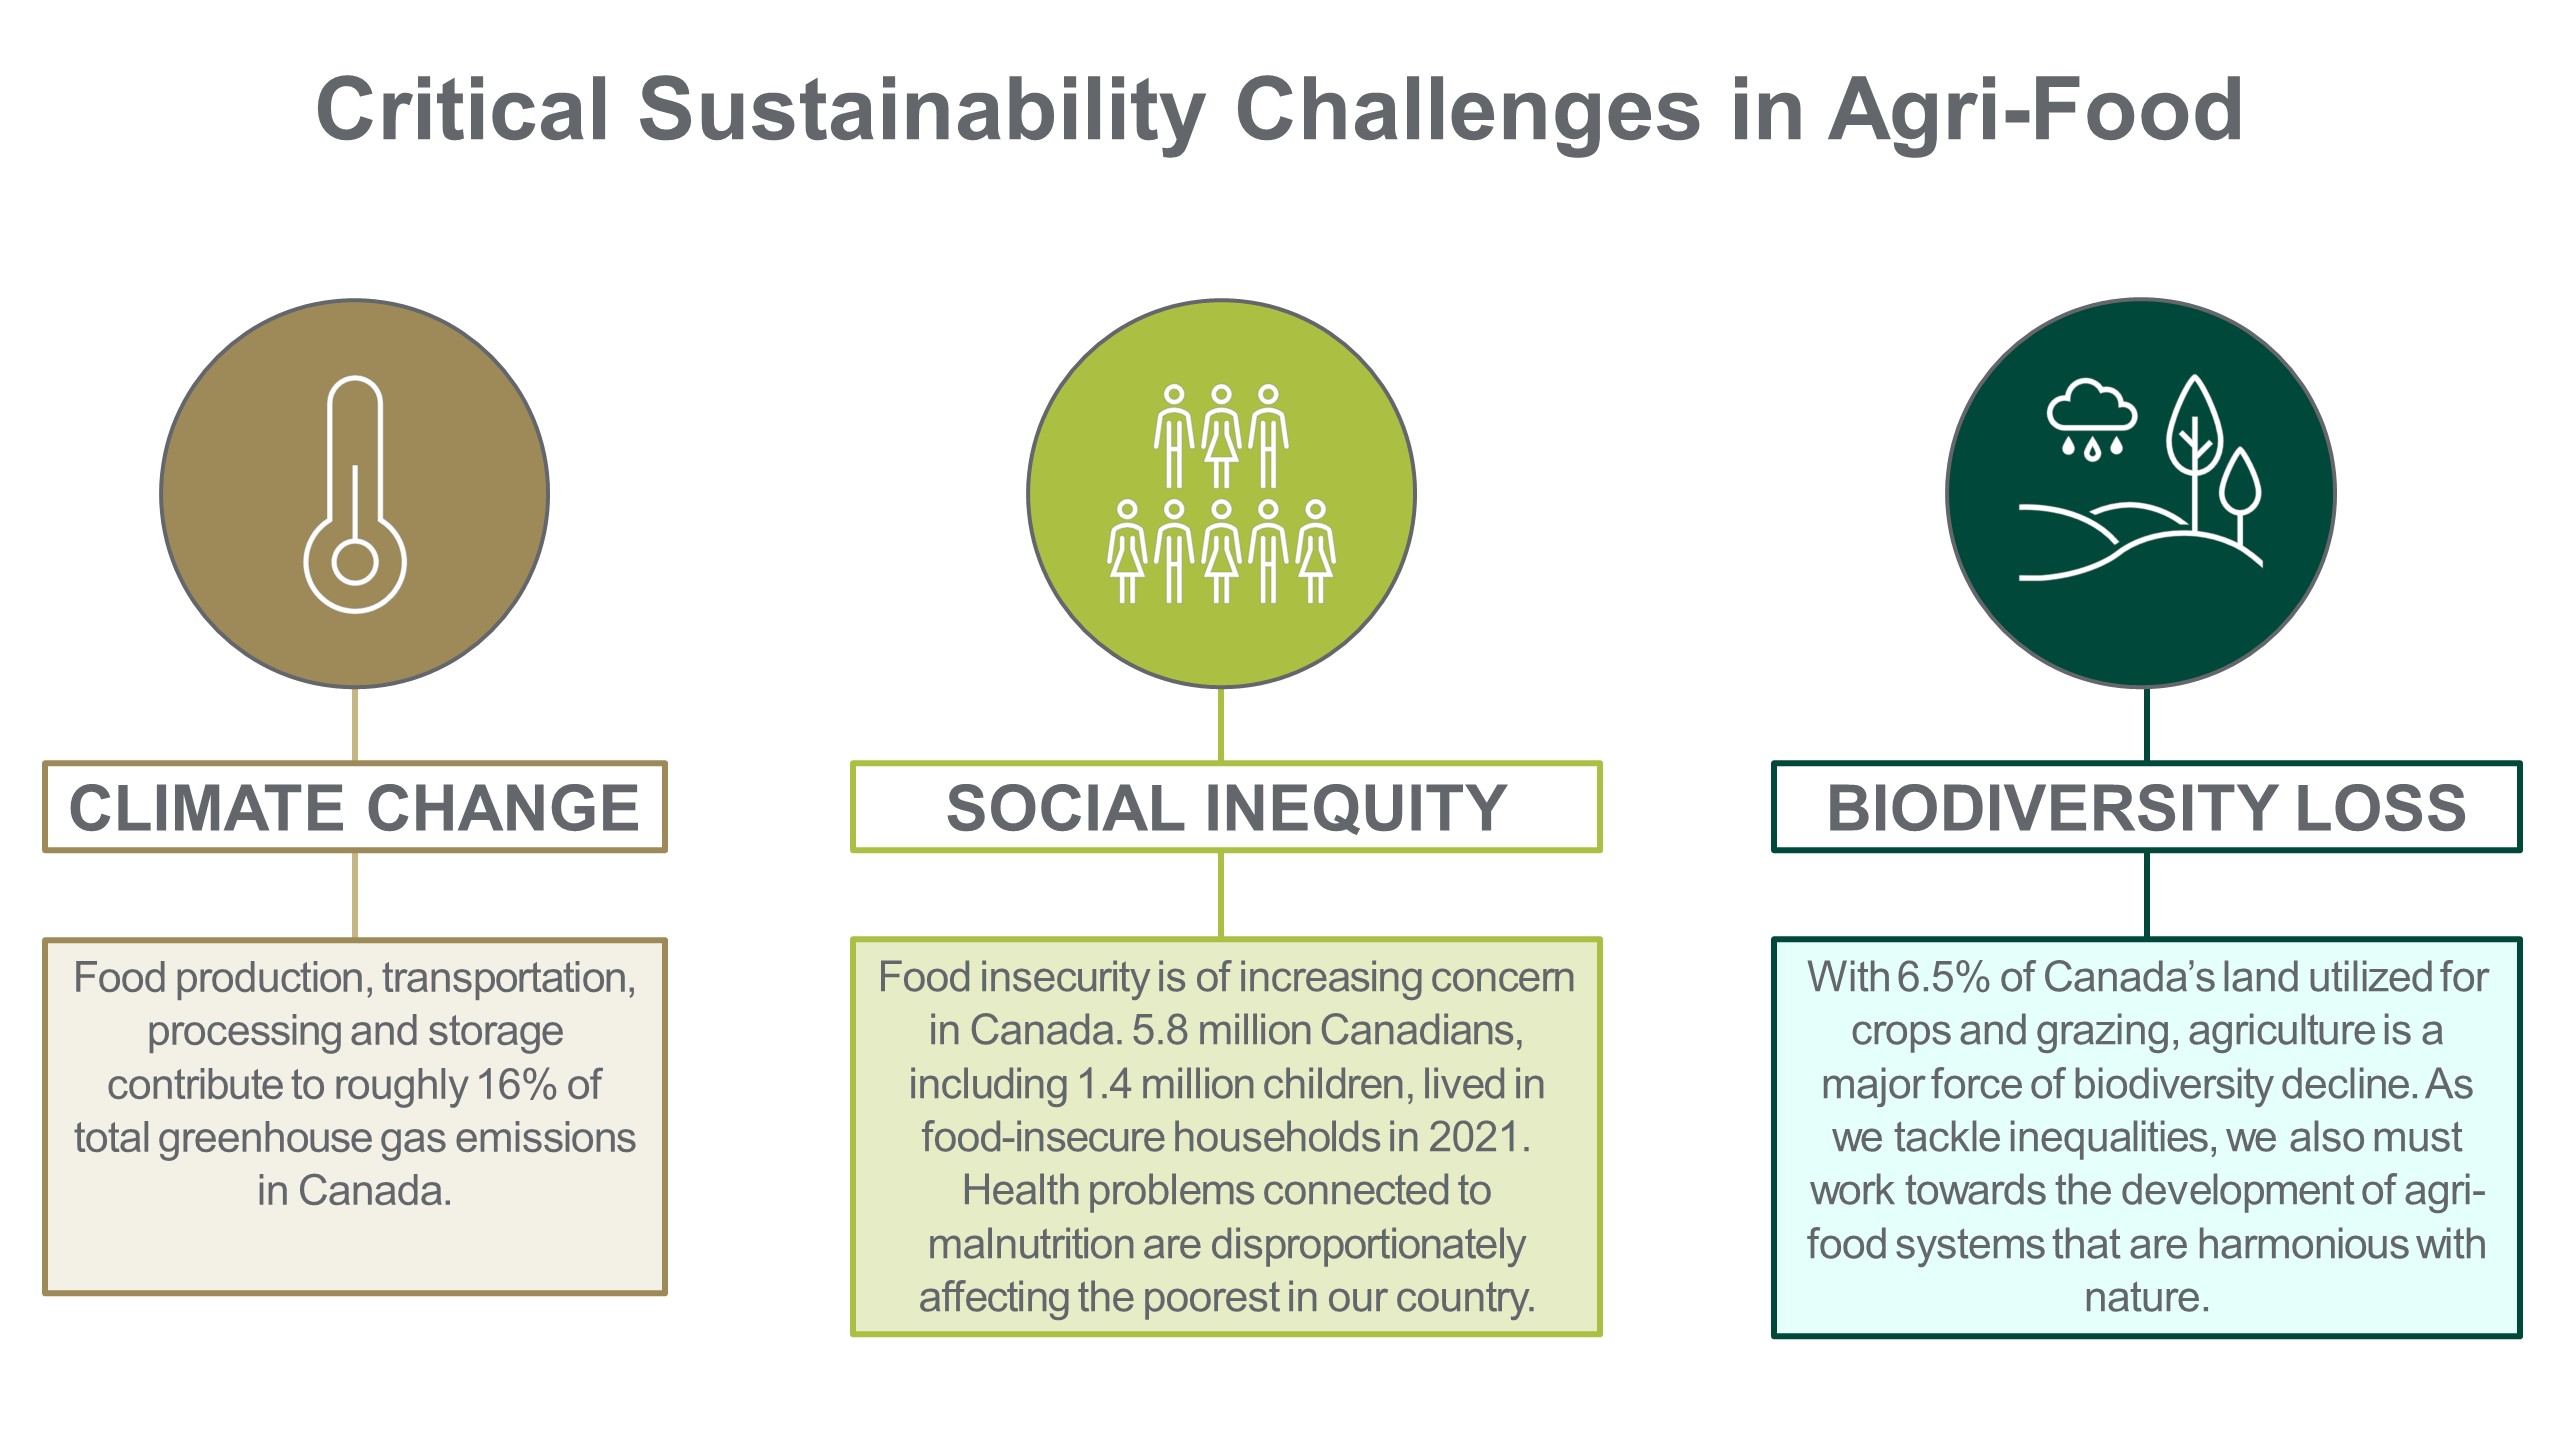 Critical sustainability issues of the agri-food industry include climate change, social inequity, and biodiversity loss